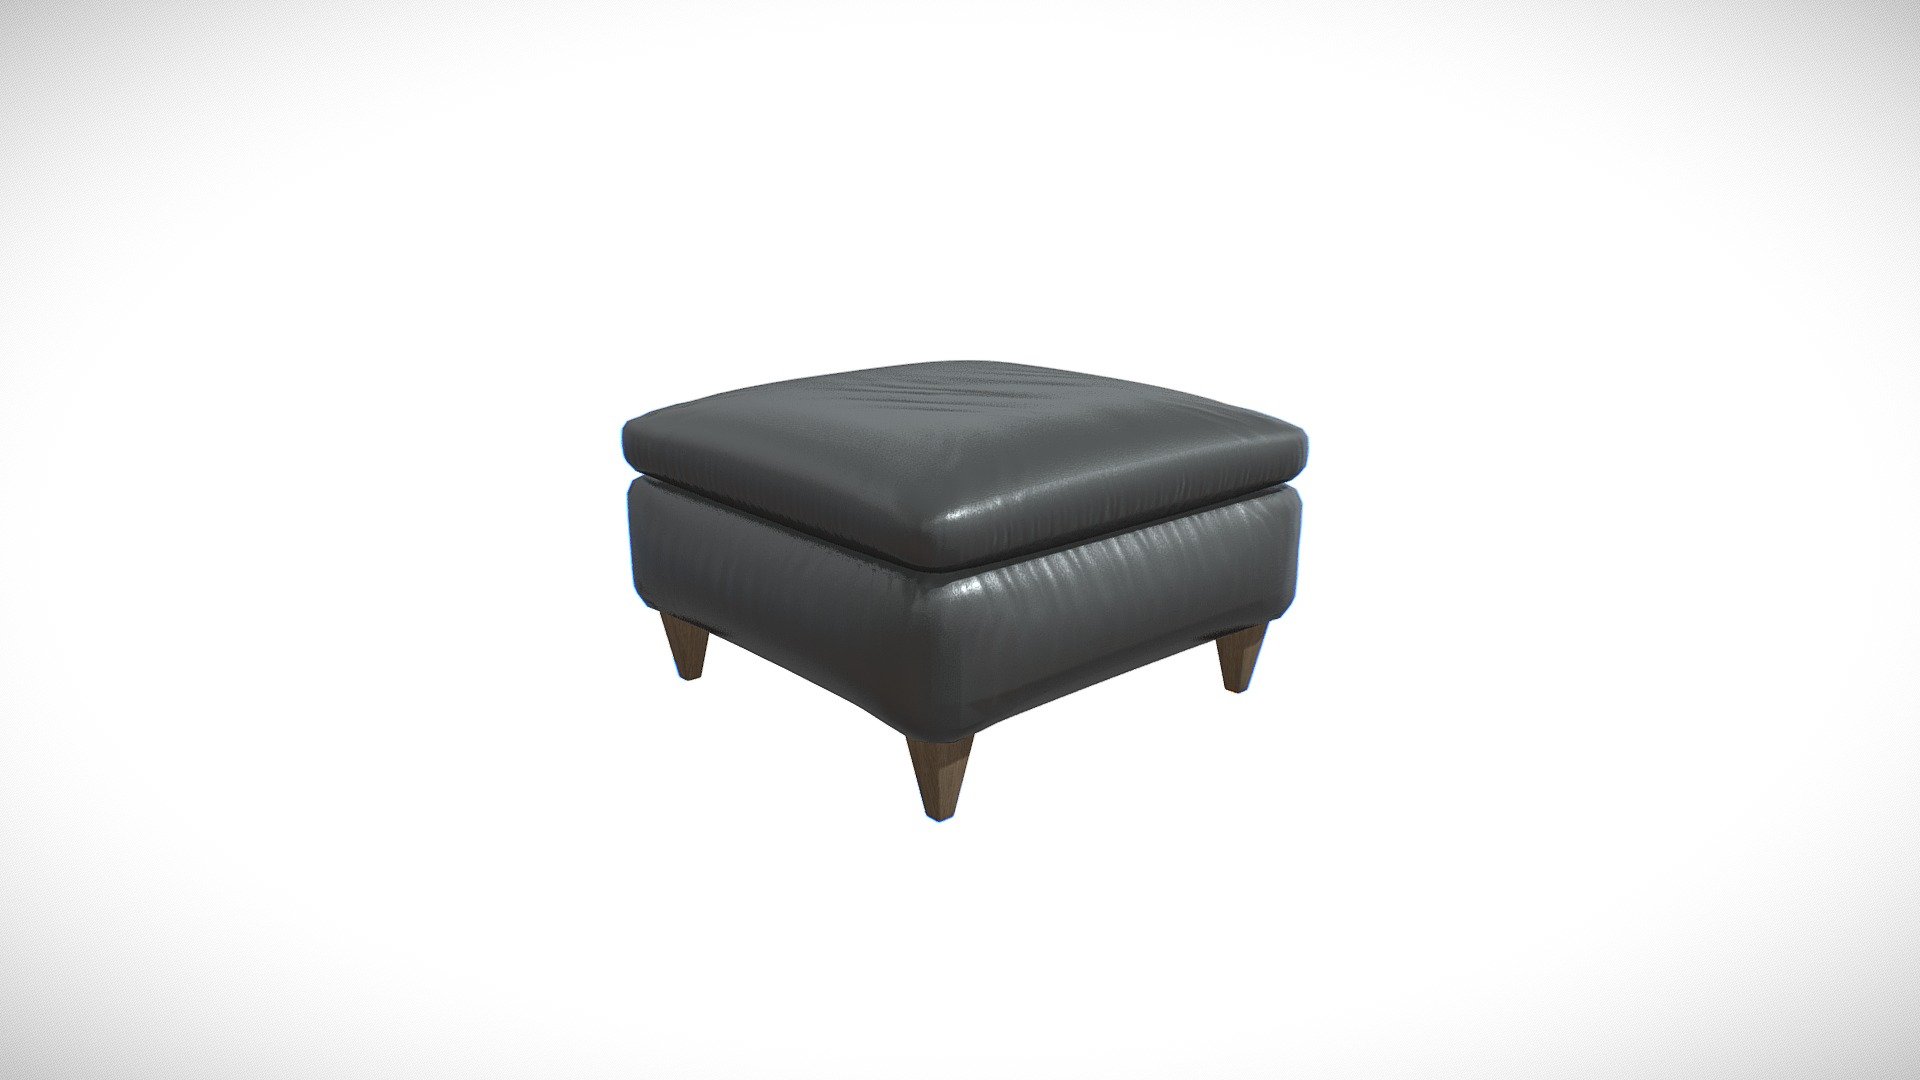 Low poly ottoman made in Blender using normal maps for the wrinkles and leather seat finish, ready for use in video games. The intensity of the wrinkles and leather can be adjusted in the shading section if using Blender.

otomana hecha en blender de pocos poligonos usando &ldquo;normal maps